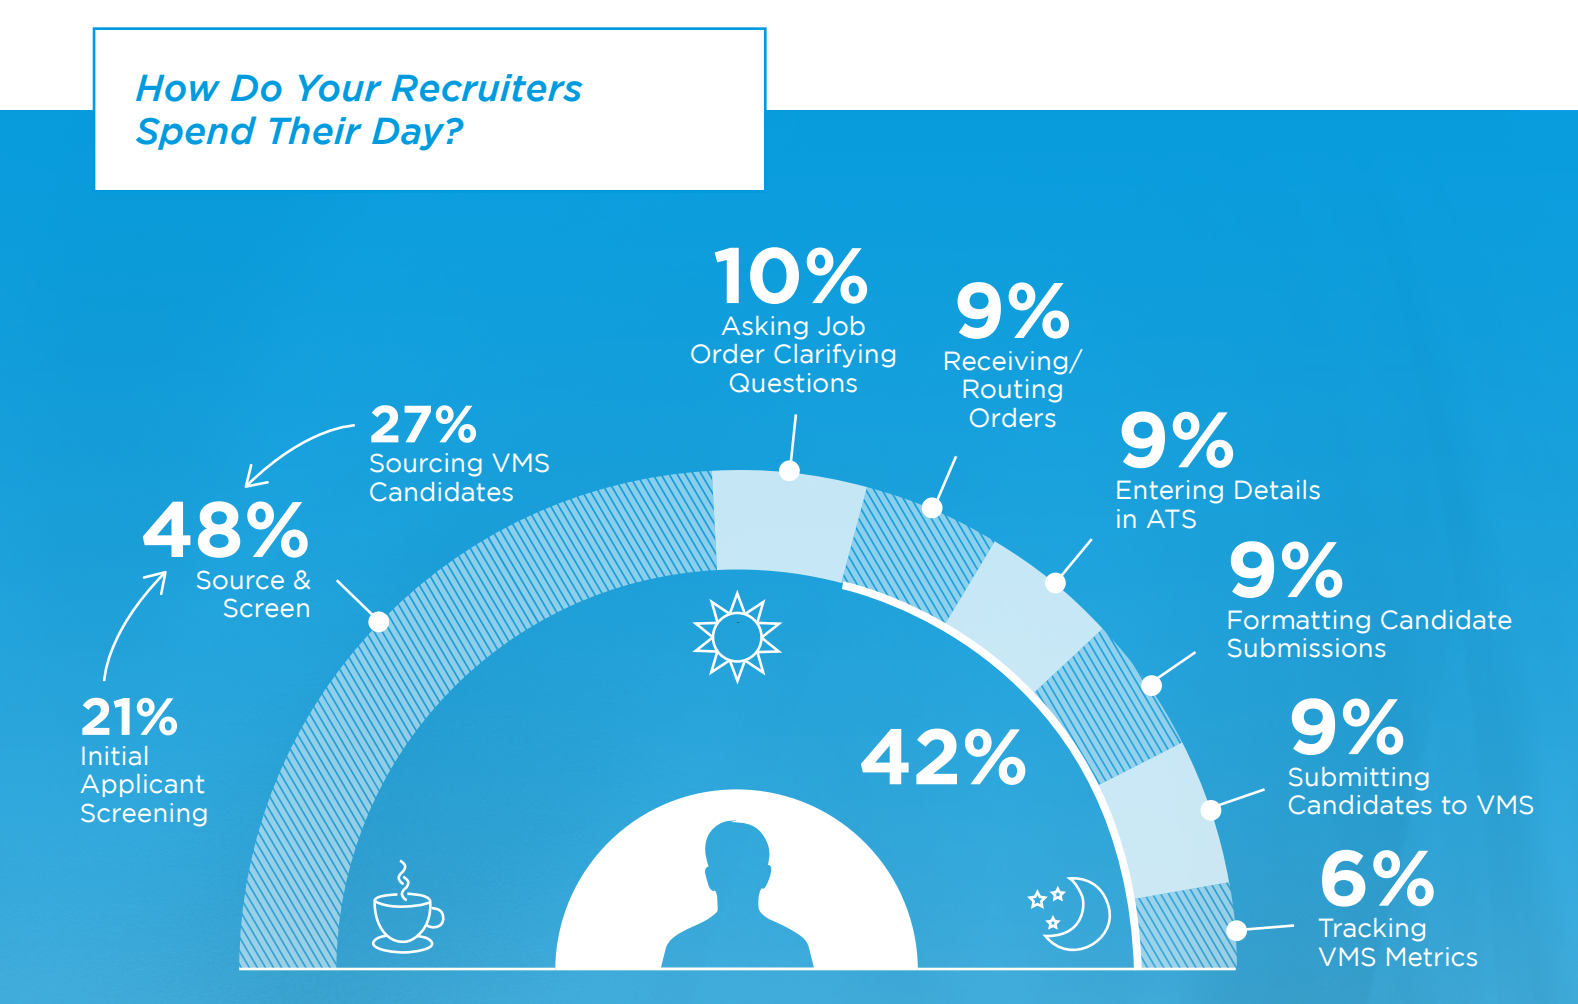 How do Recruiters spend their time on VMS?